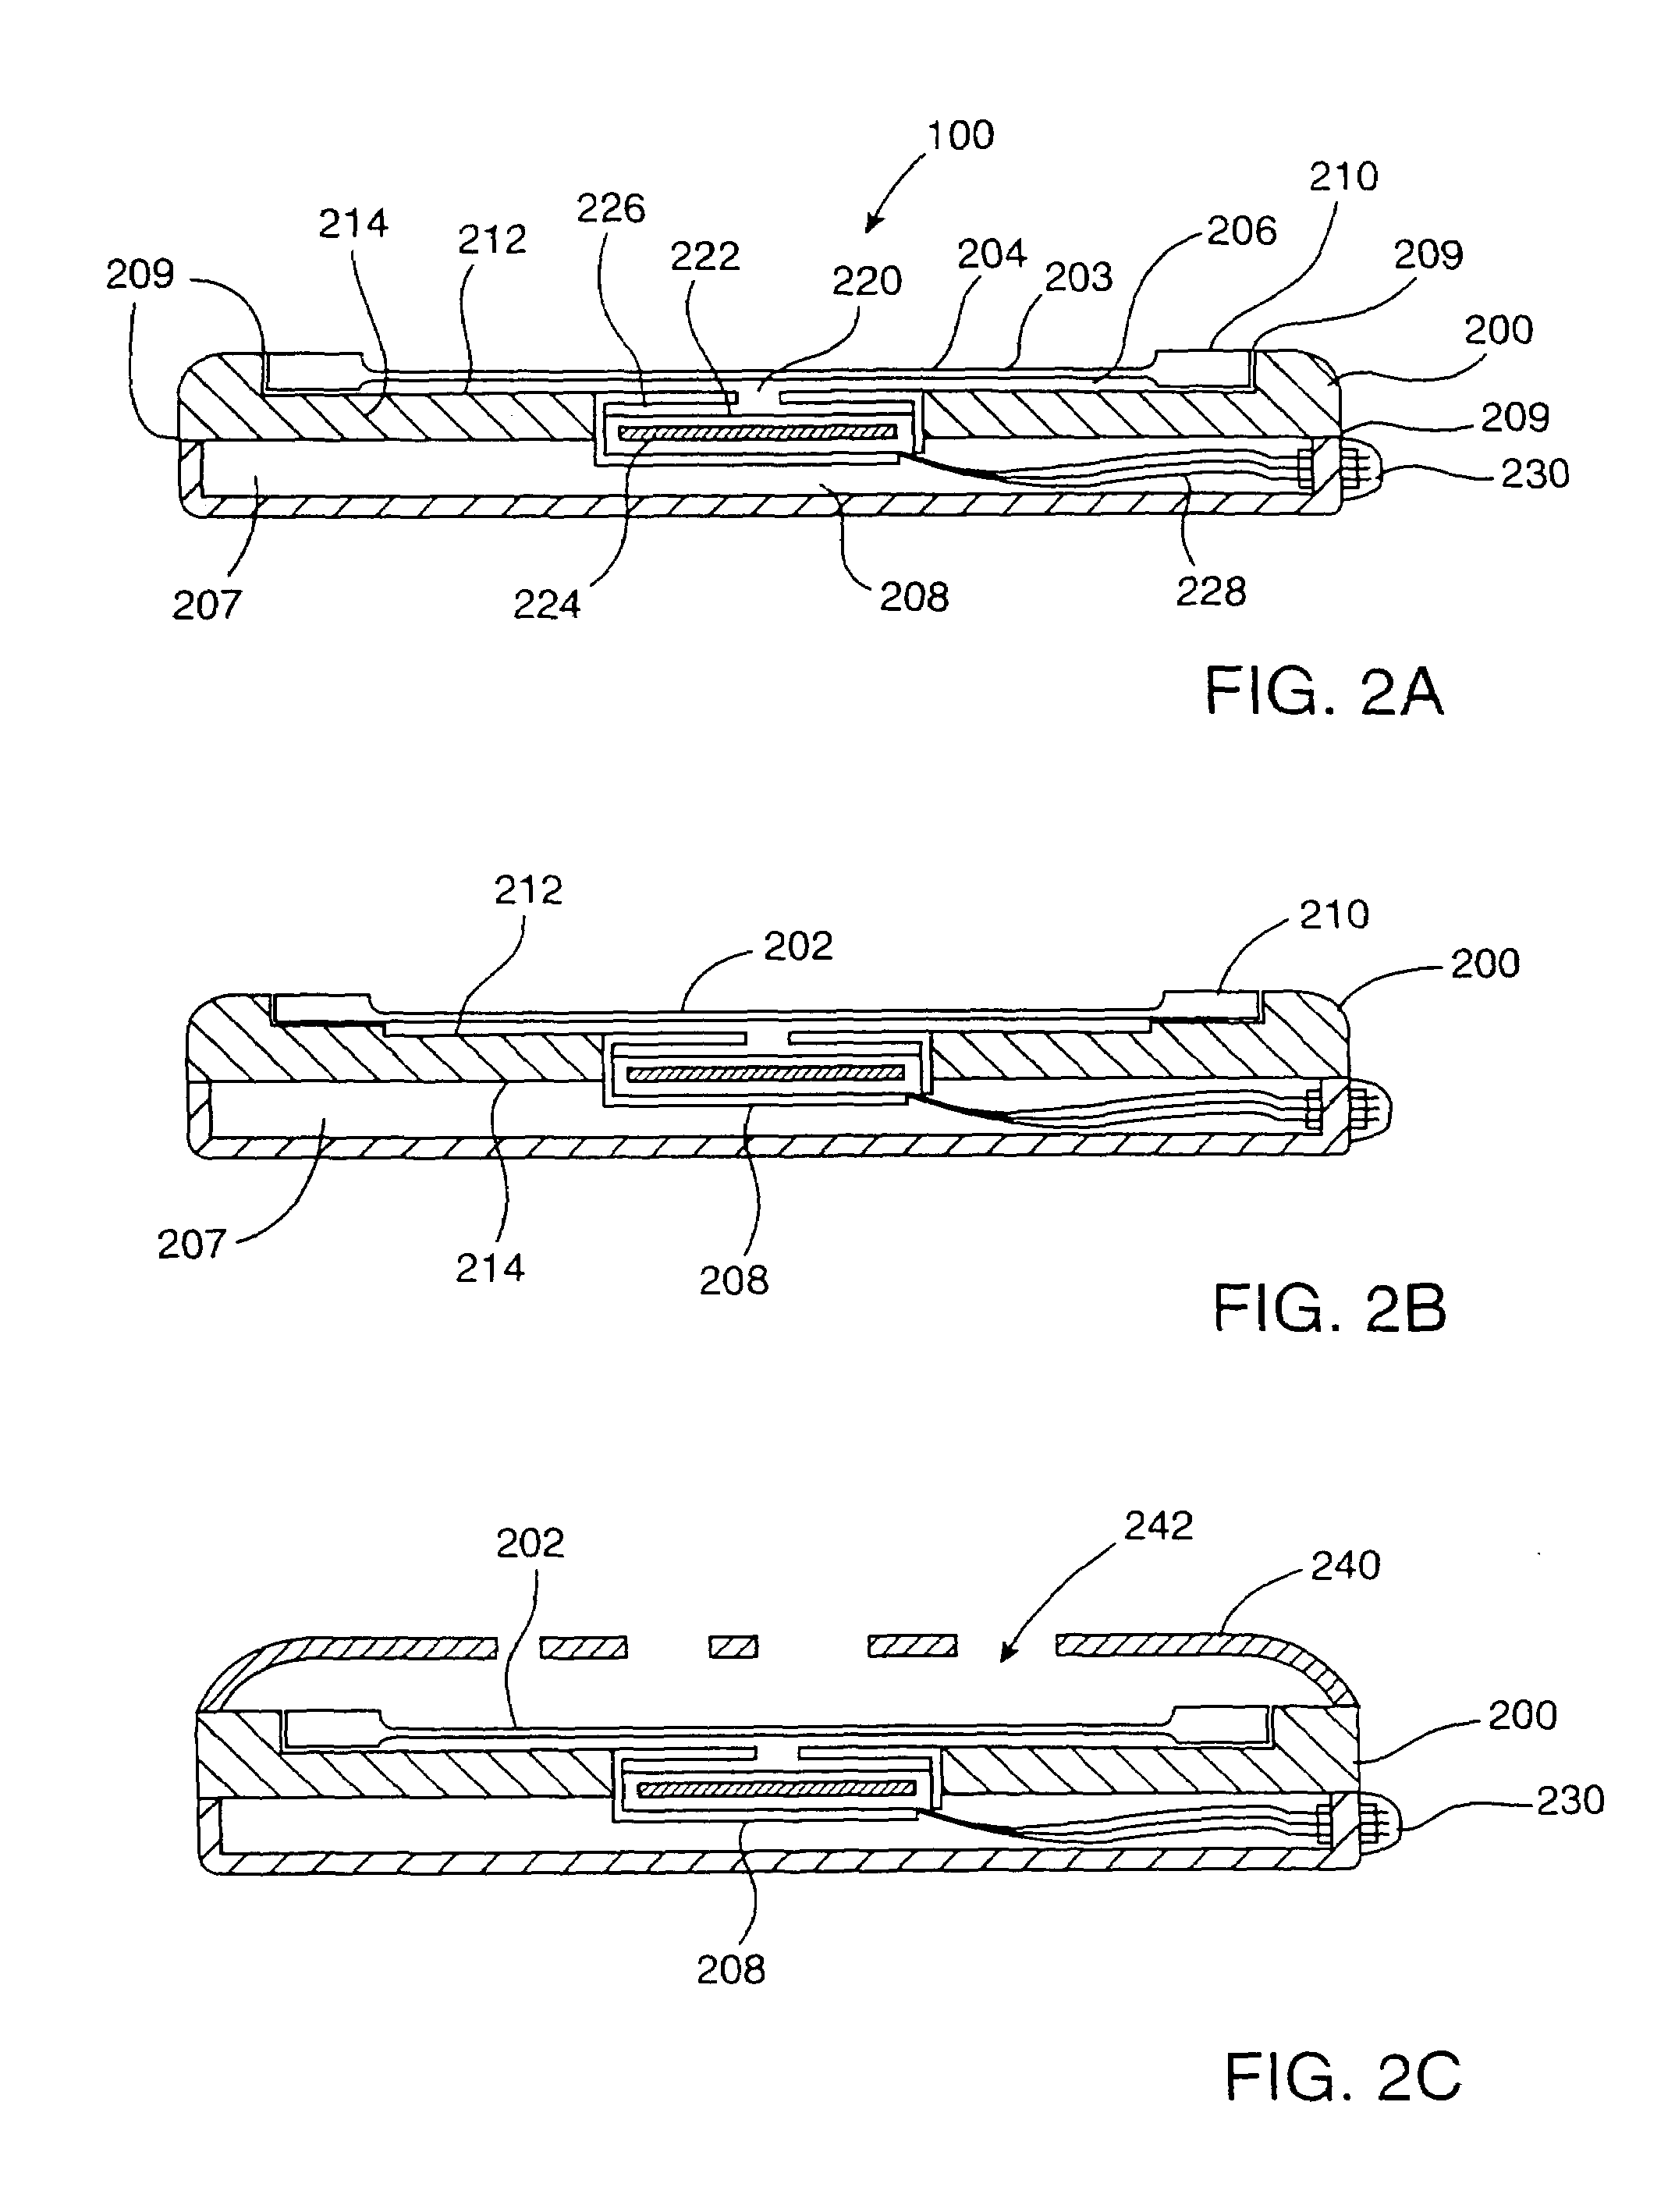 Implantable microphone having sensitivity and frequency response